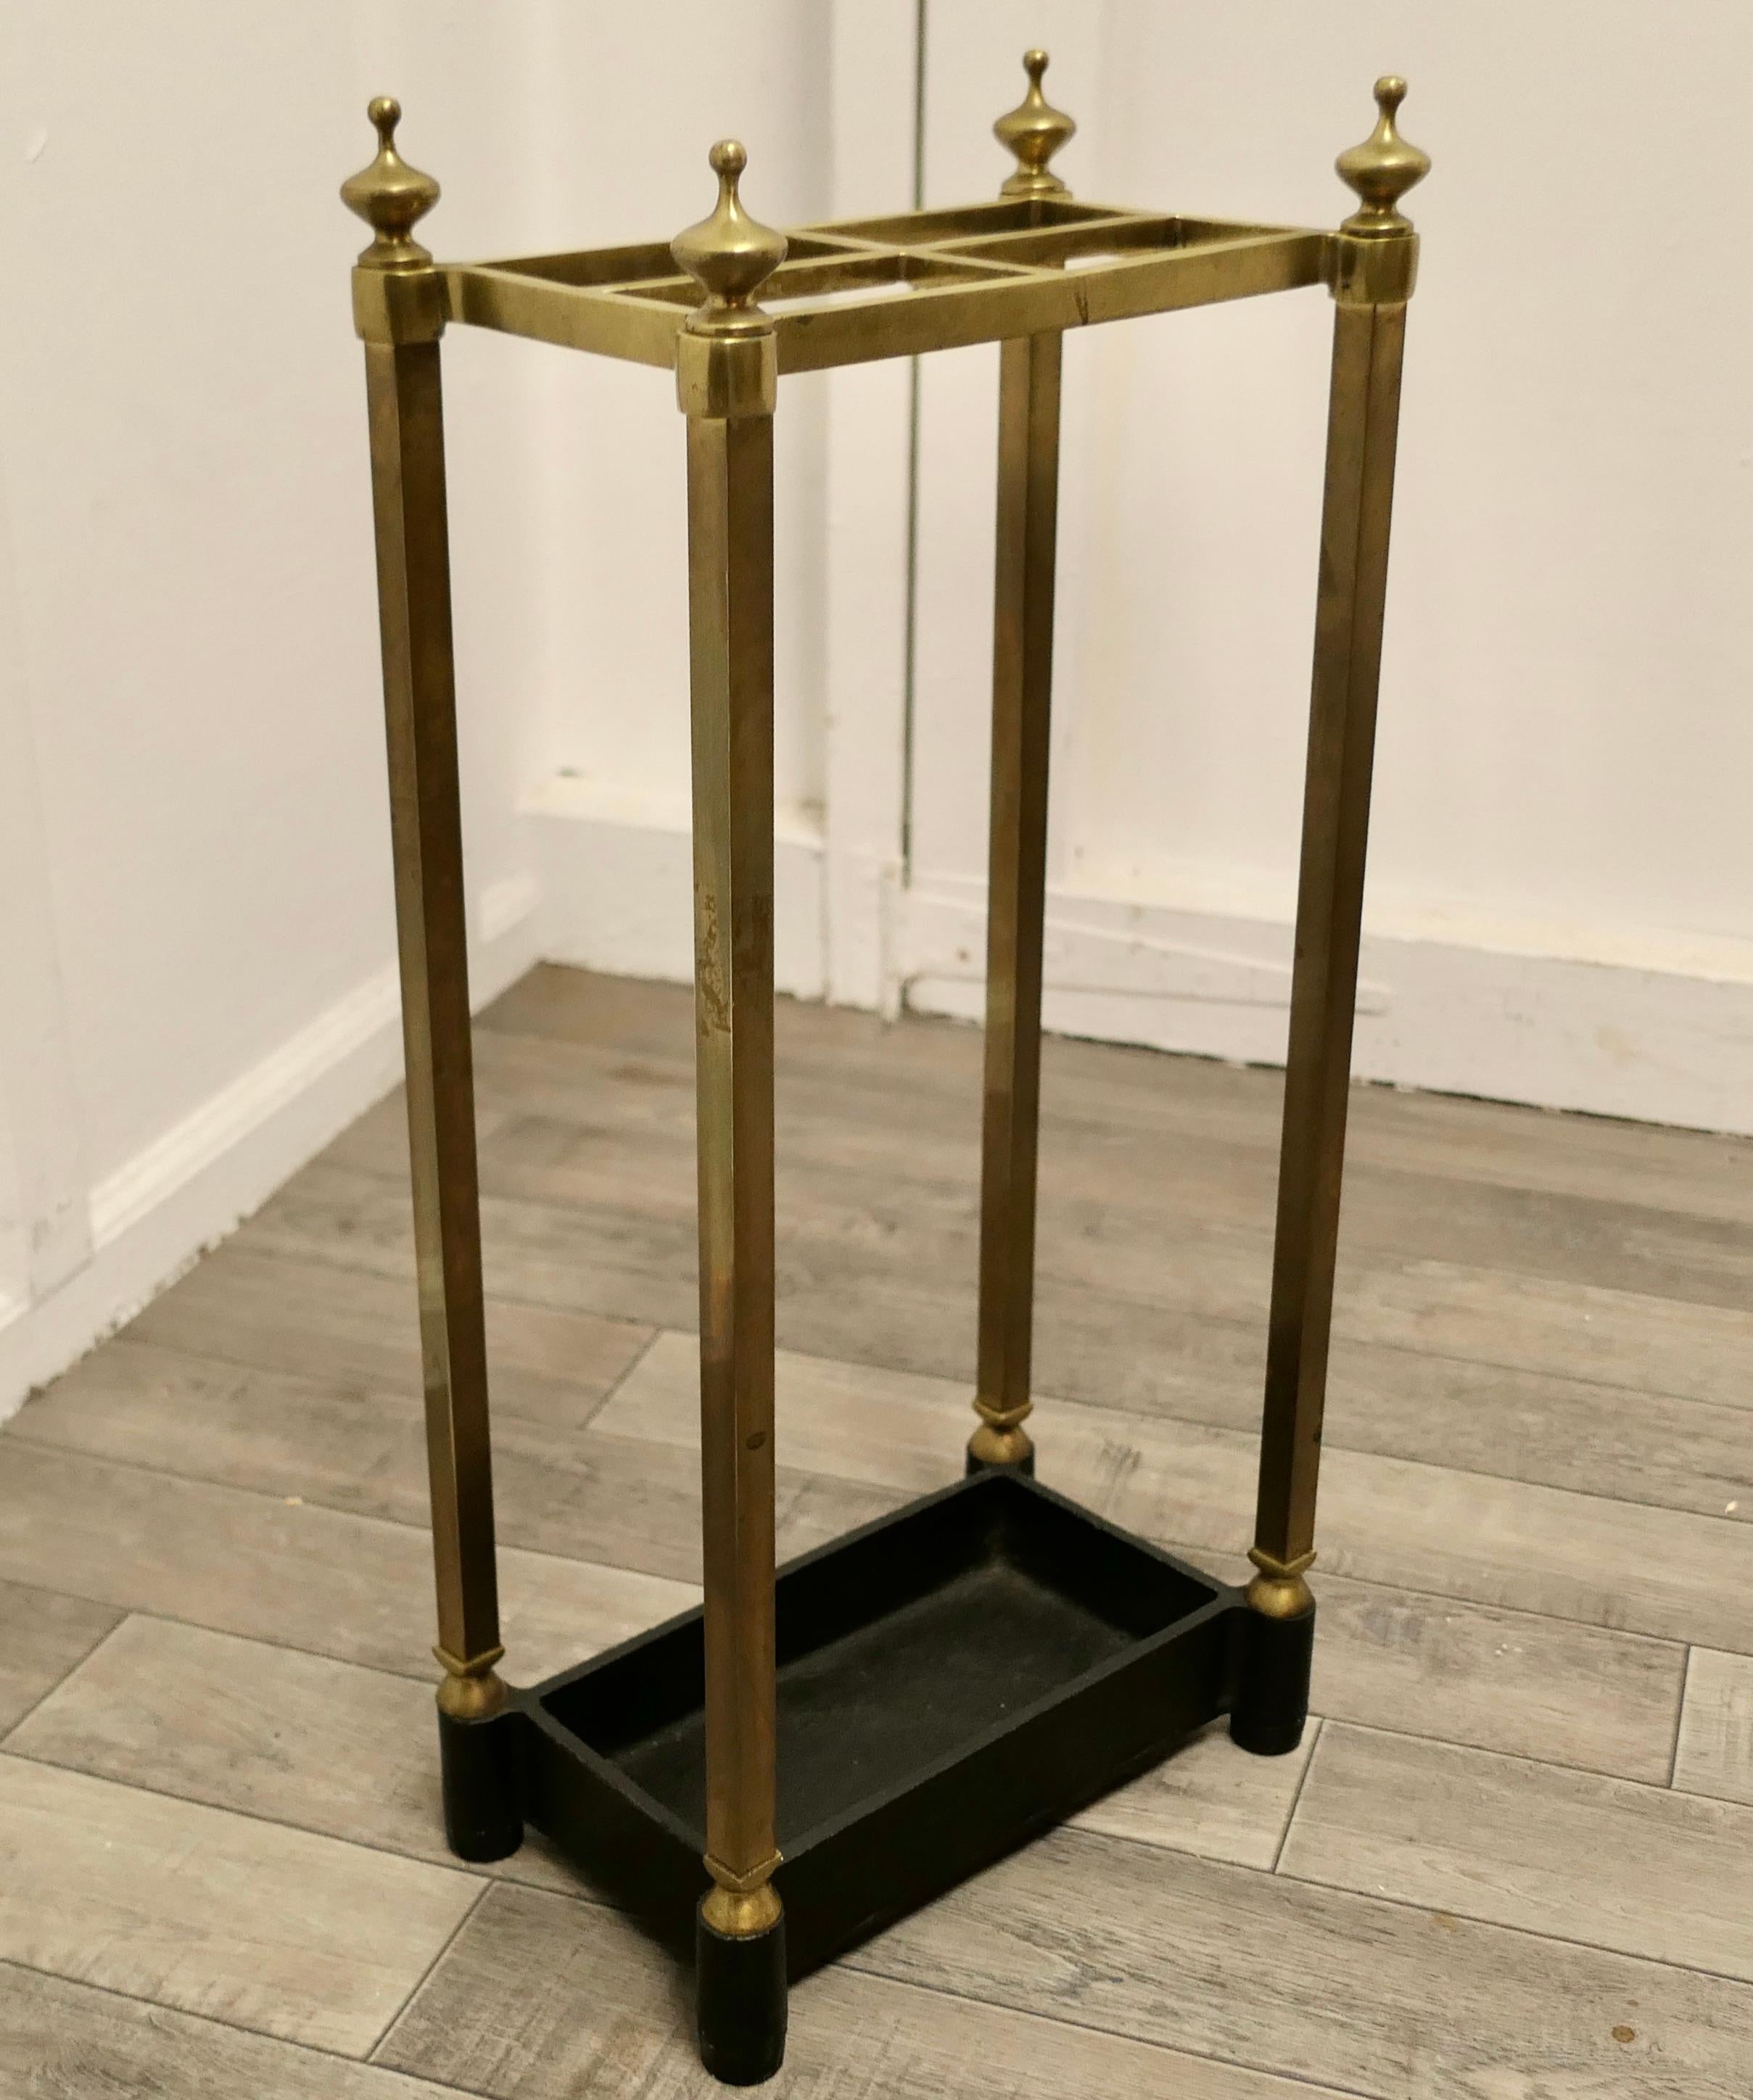 Victorian brass and cast iron umbrella stand or stick stand.

A charming piece, the stand has a brass top divided into 4 sections to hold either walking sticks or umbrellas, the heavy iron base is the drip tray
The stand is in good sturdy